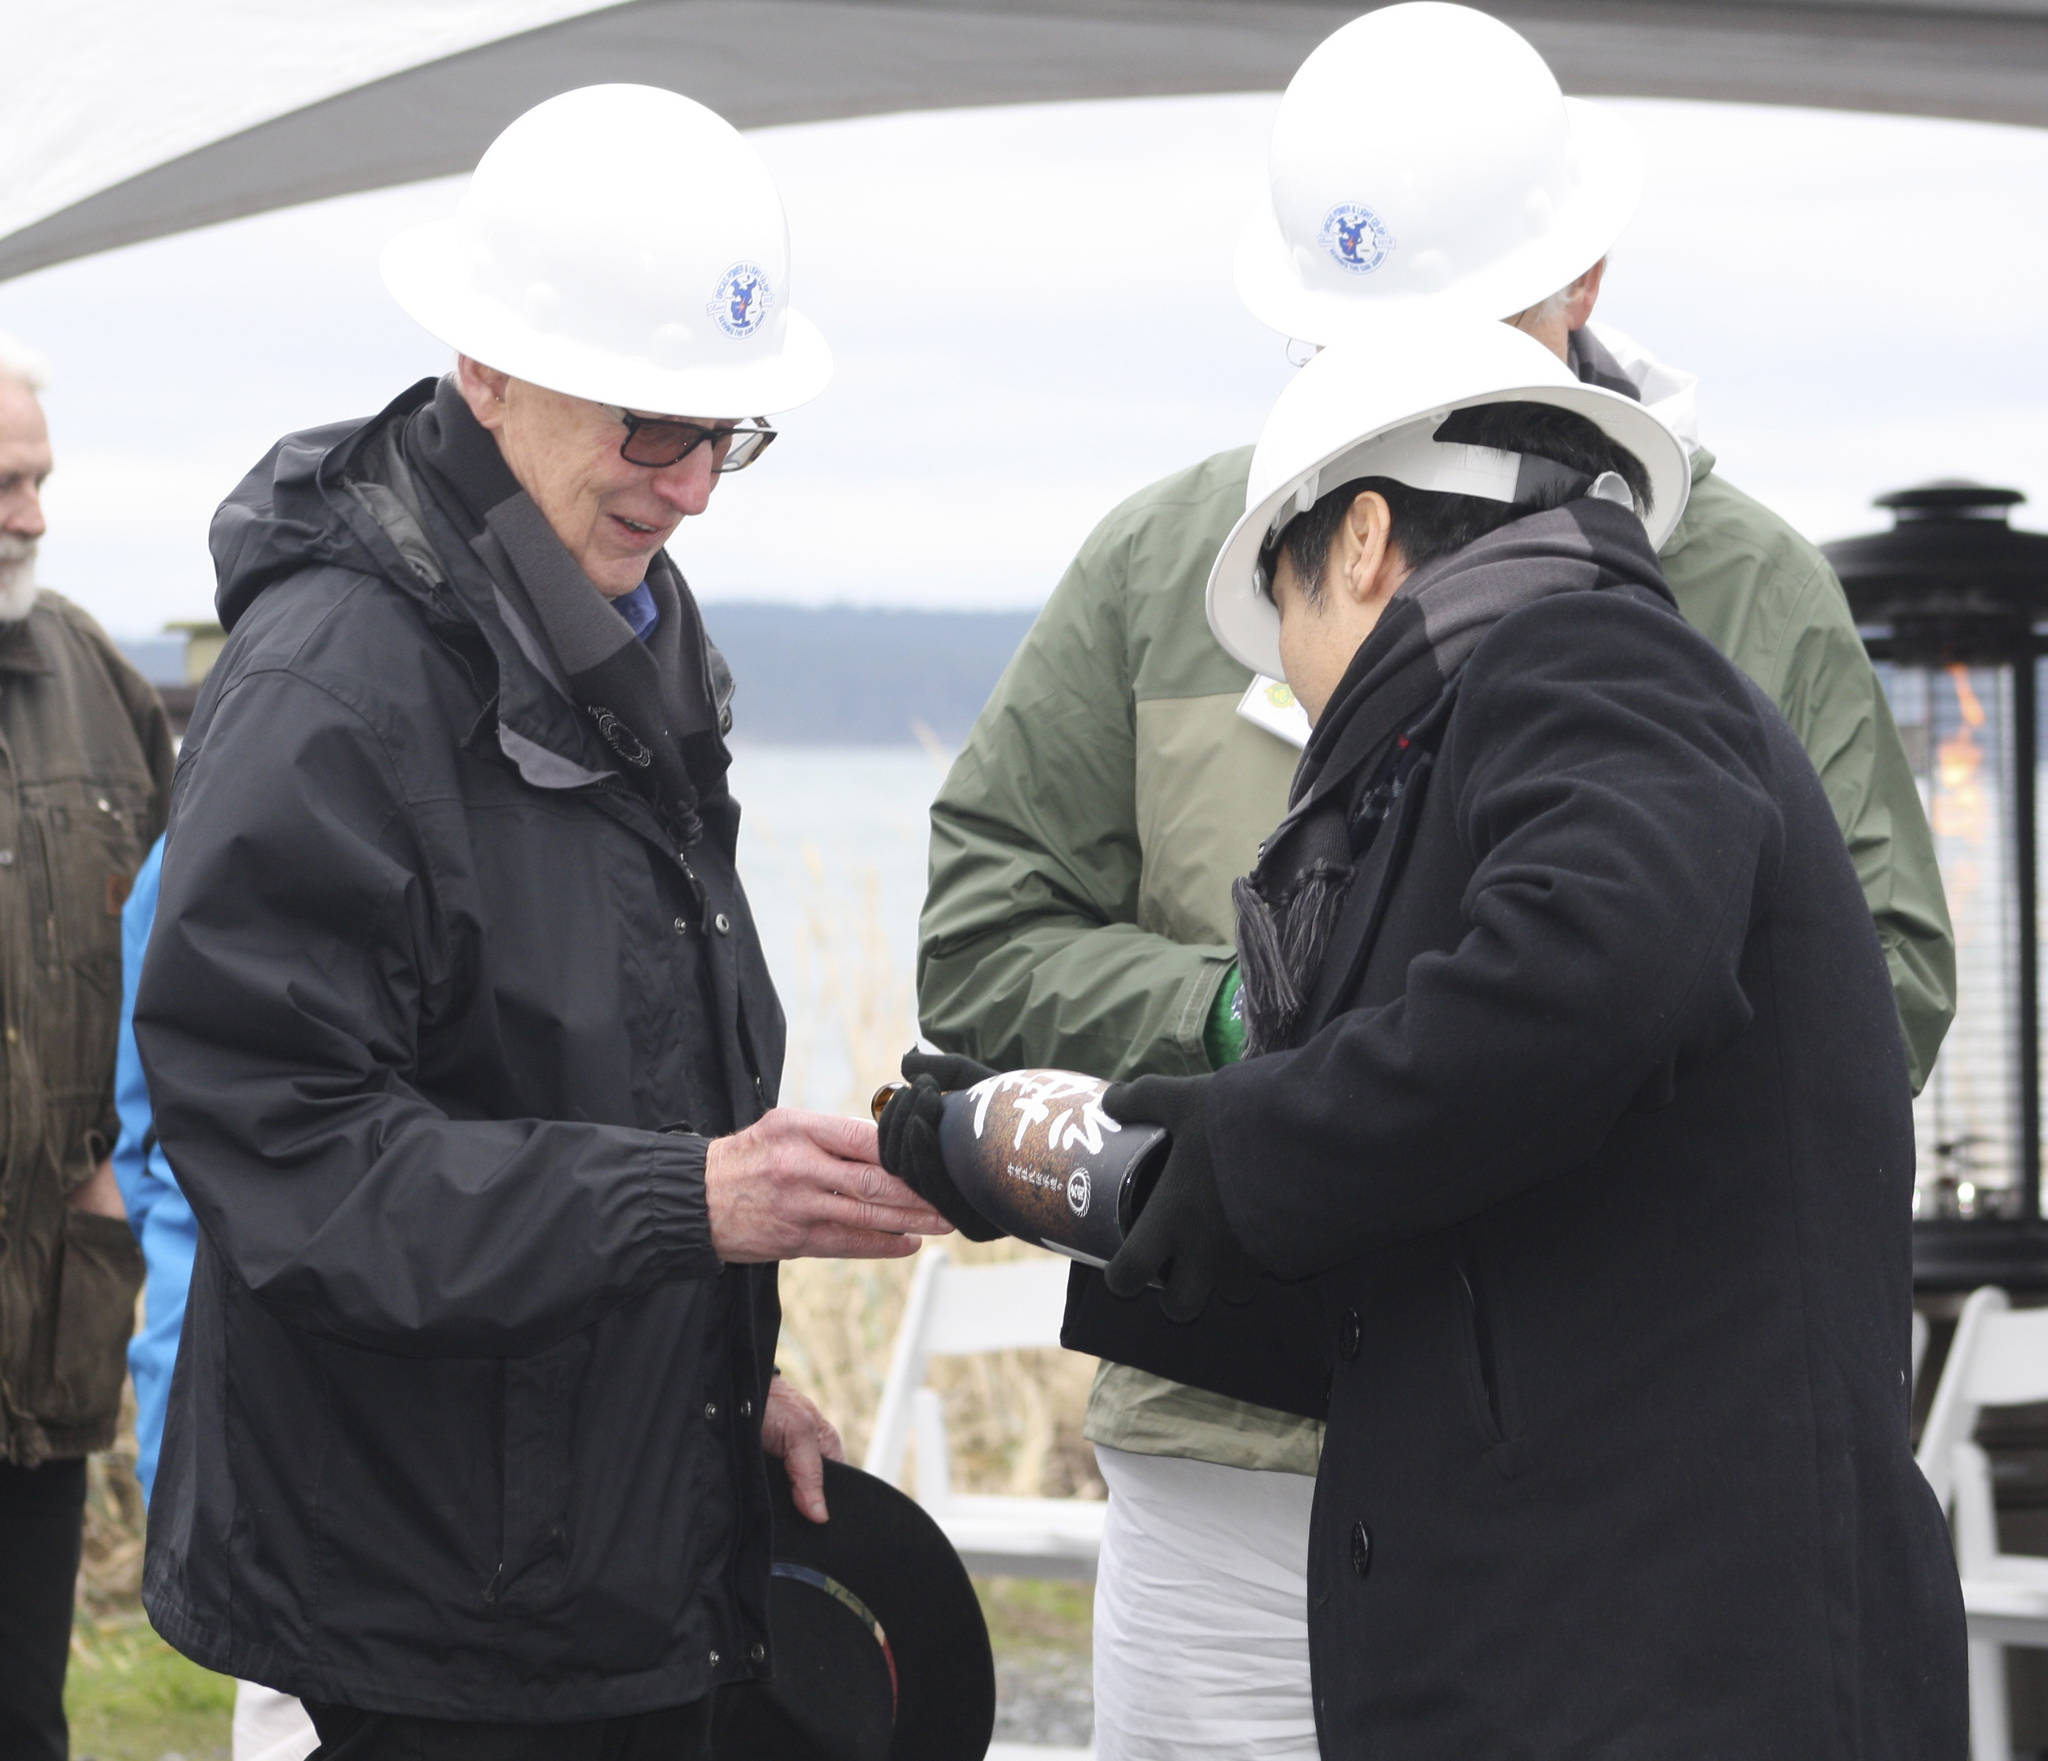 Staff photo/Hayley Day                                Keizo Takeo from the company that made the cable, Sumitomo Electric, pours sake for guests to celebrate the cable installation.